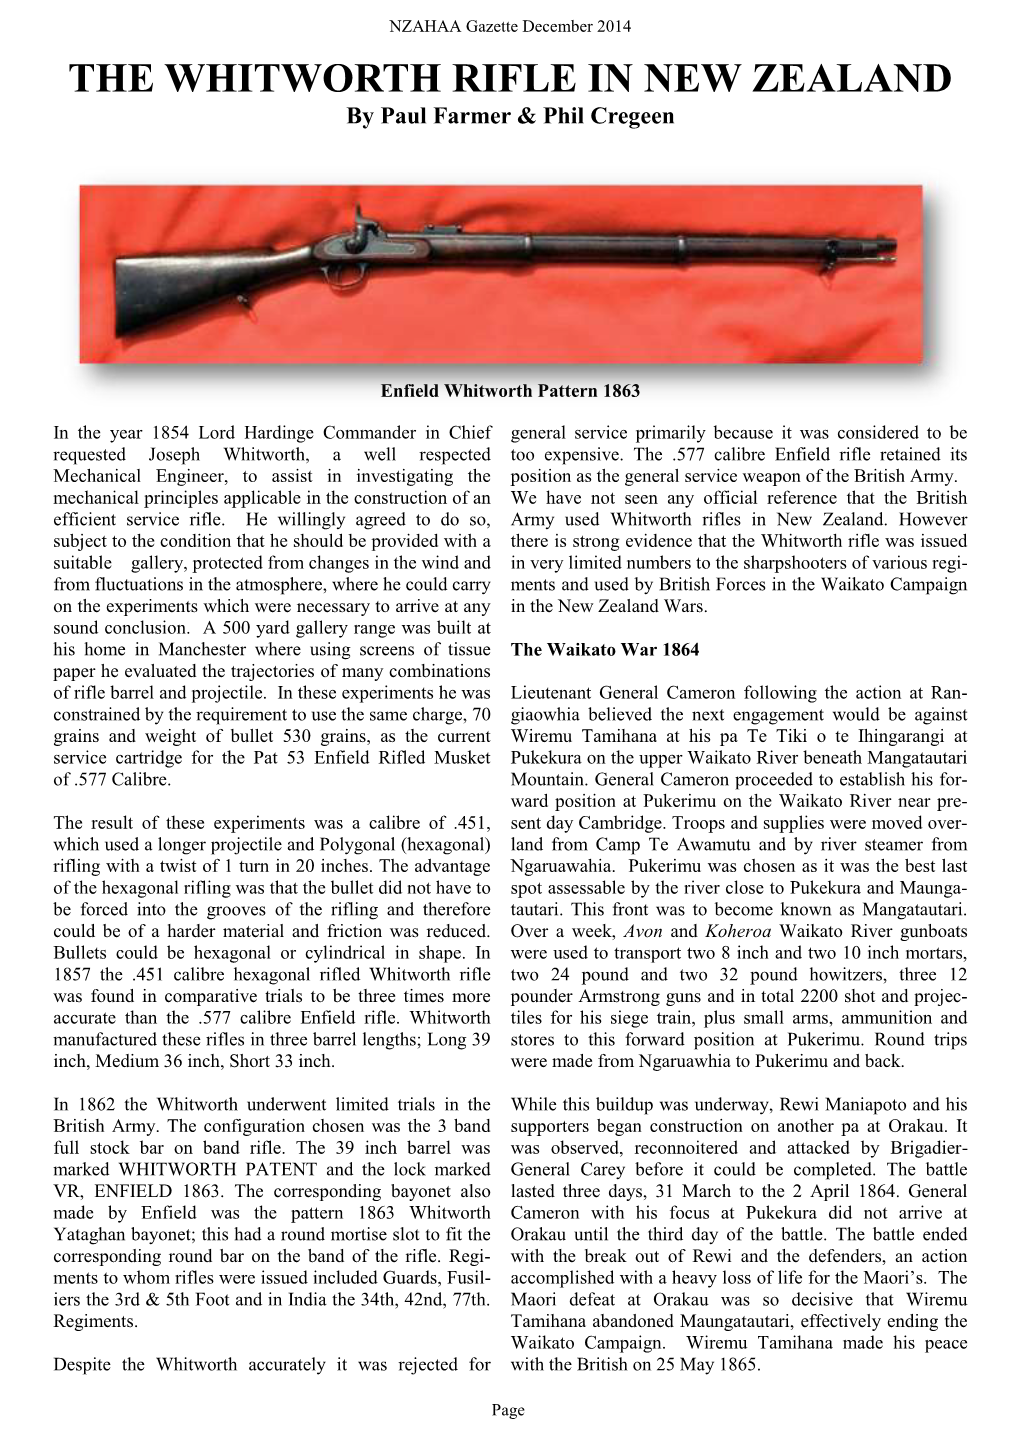 THE WHITWORTH RIFLE in NEW ZEALAND by Paul Farmer & Phil Cregeen